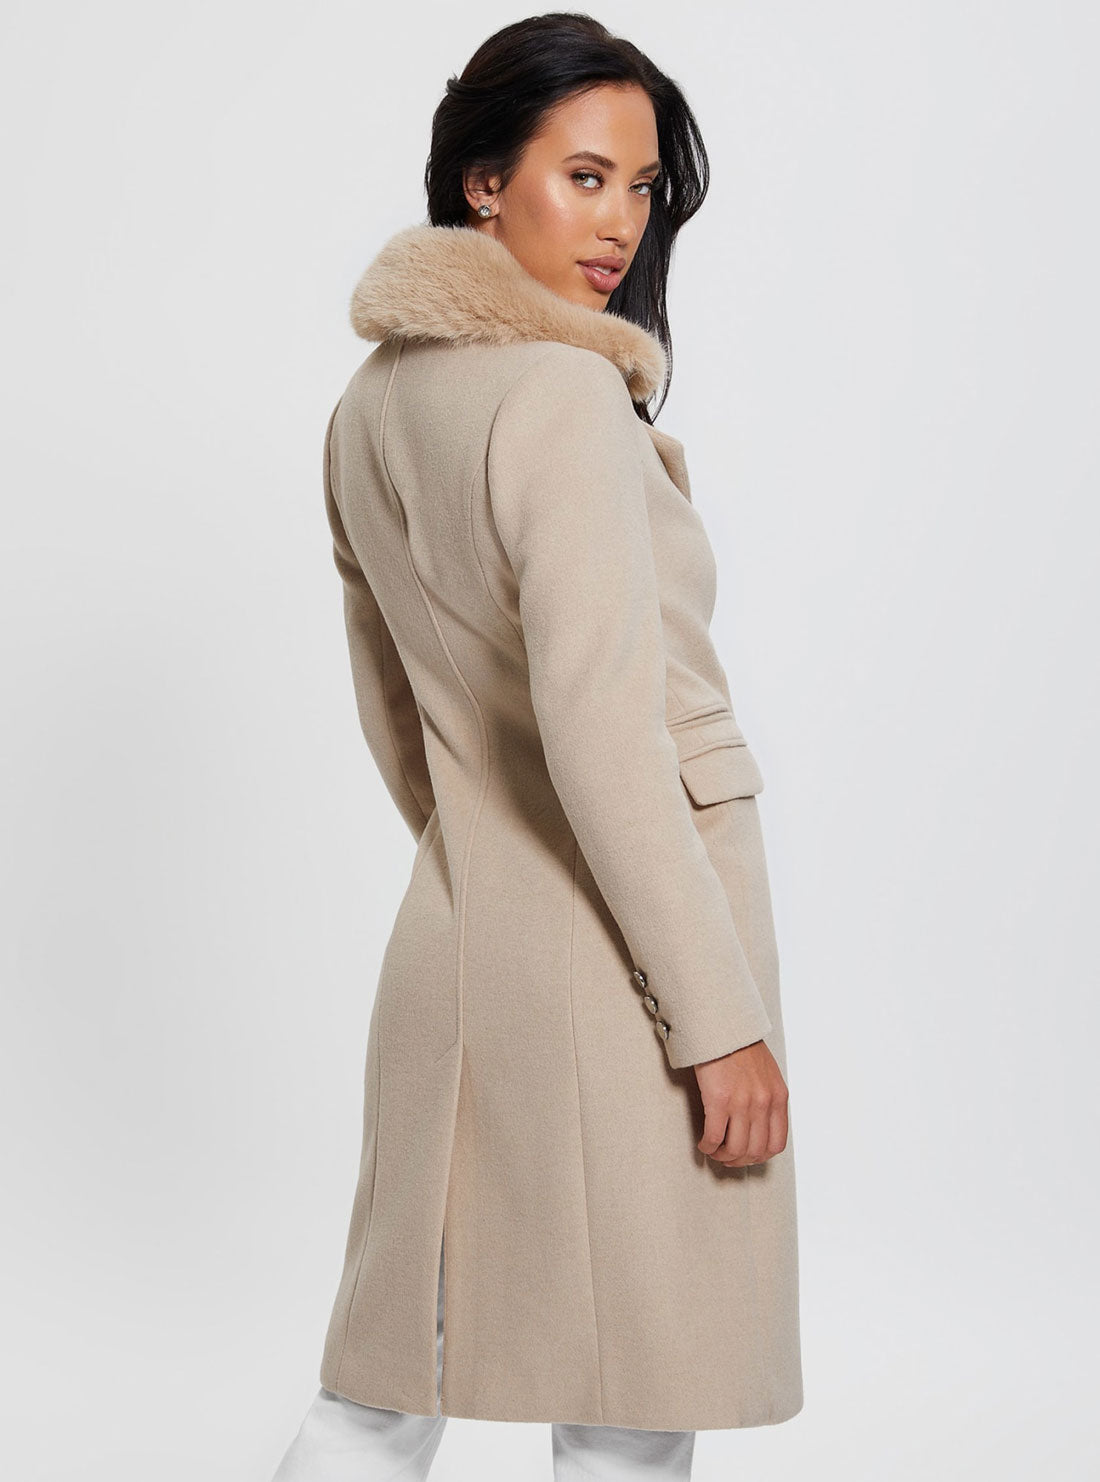 GUESS Eco Beige New Laurence Coat side view